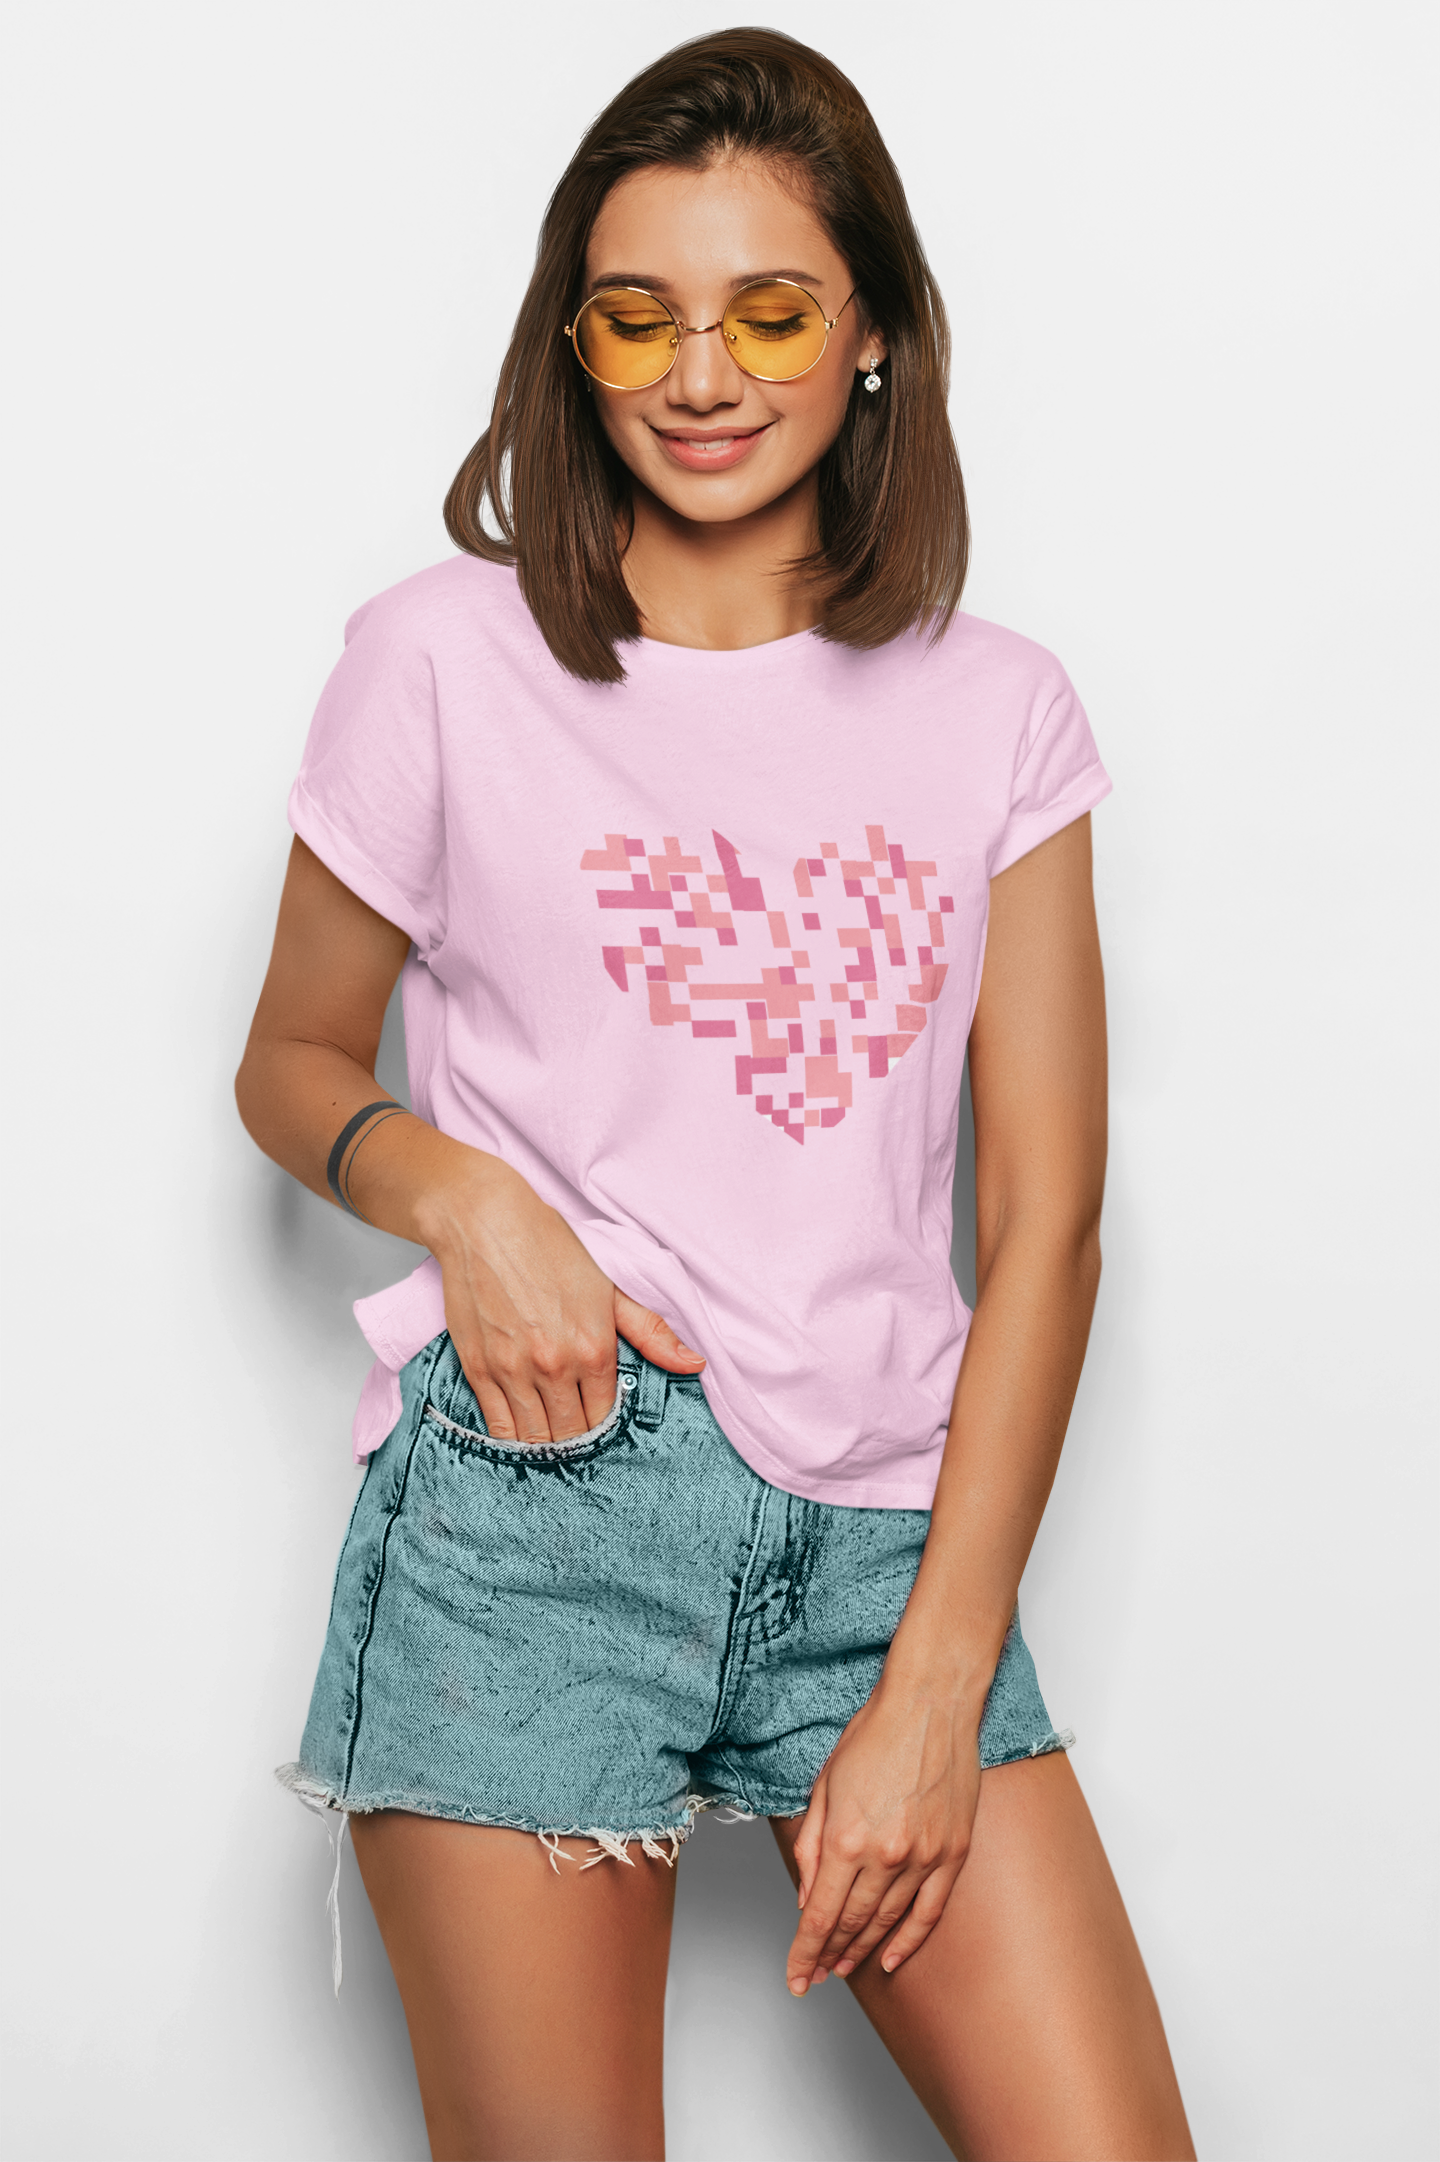 WOMEN'S T-SHIRT BABY PINK : HEARTS PATTERN AT CENTER